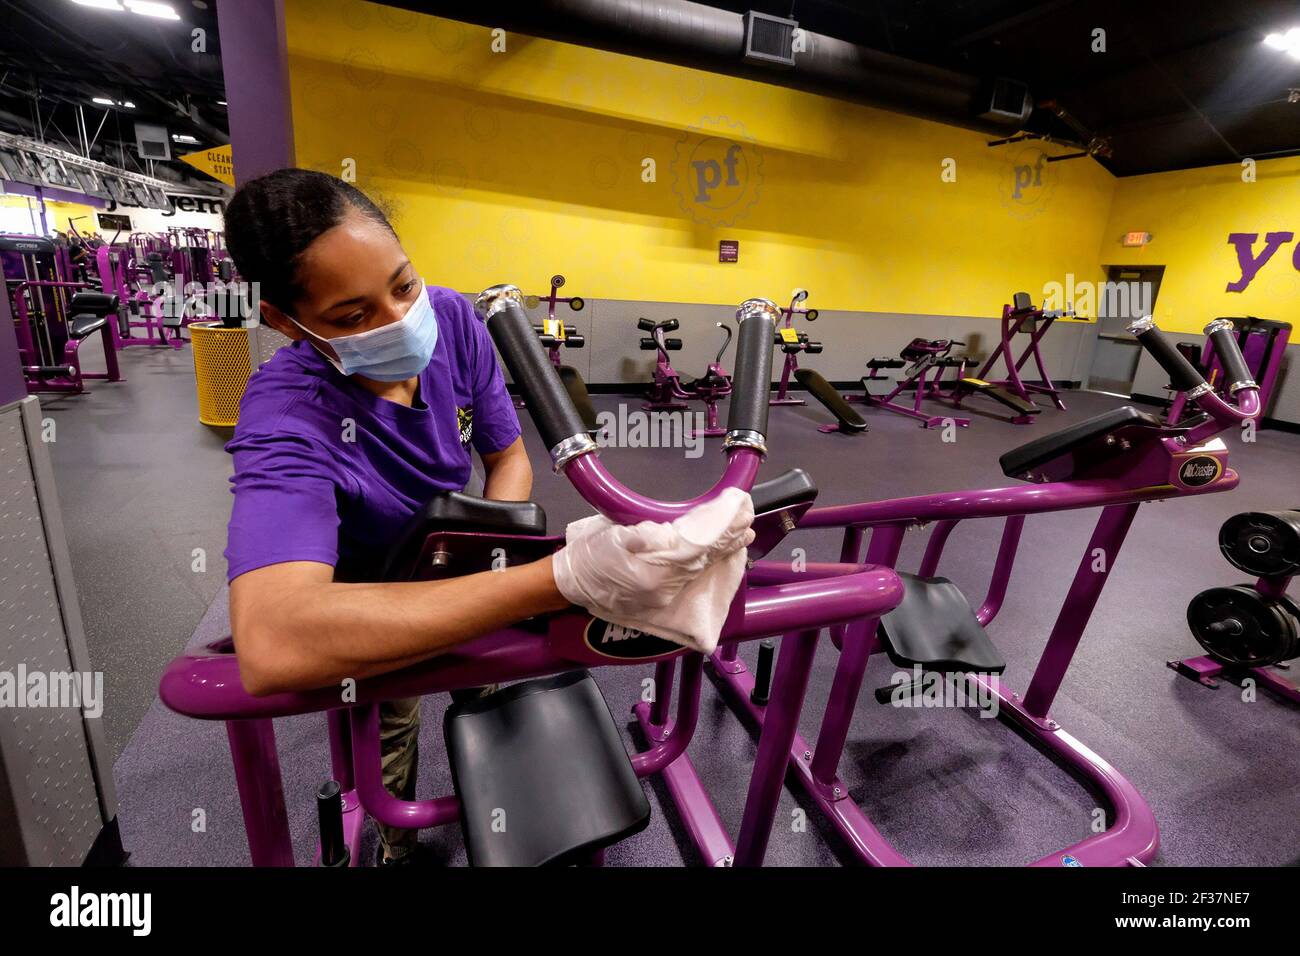 Inglewood, California, USA. 15th Mar, 2021. A Planet Fitness staff cleans  gym equipment to prepare the reopening after being closed due to Covid-19  pandemic. Los Angeles County fitness centers are able to